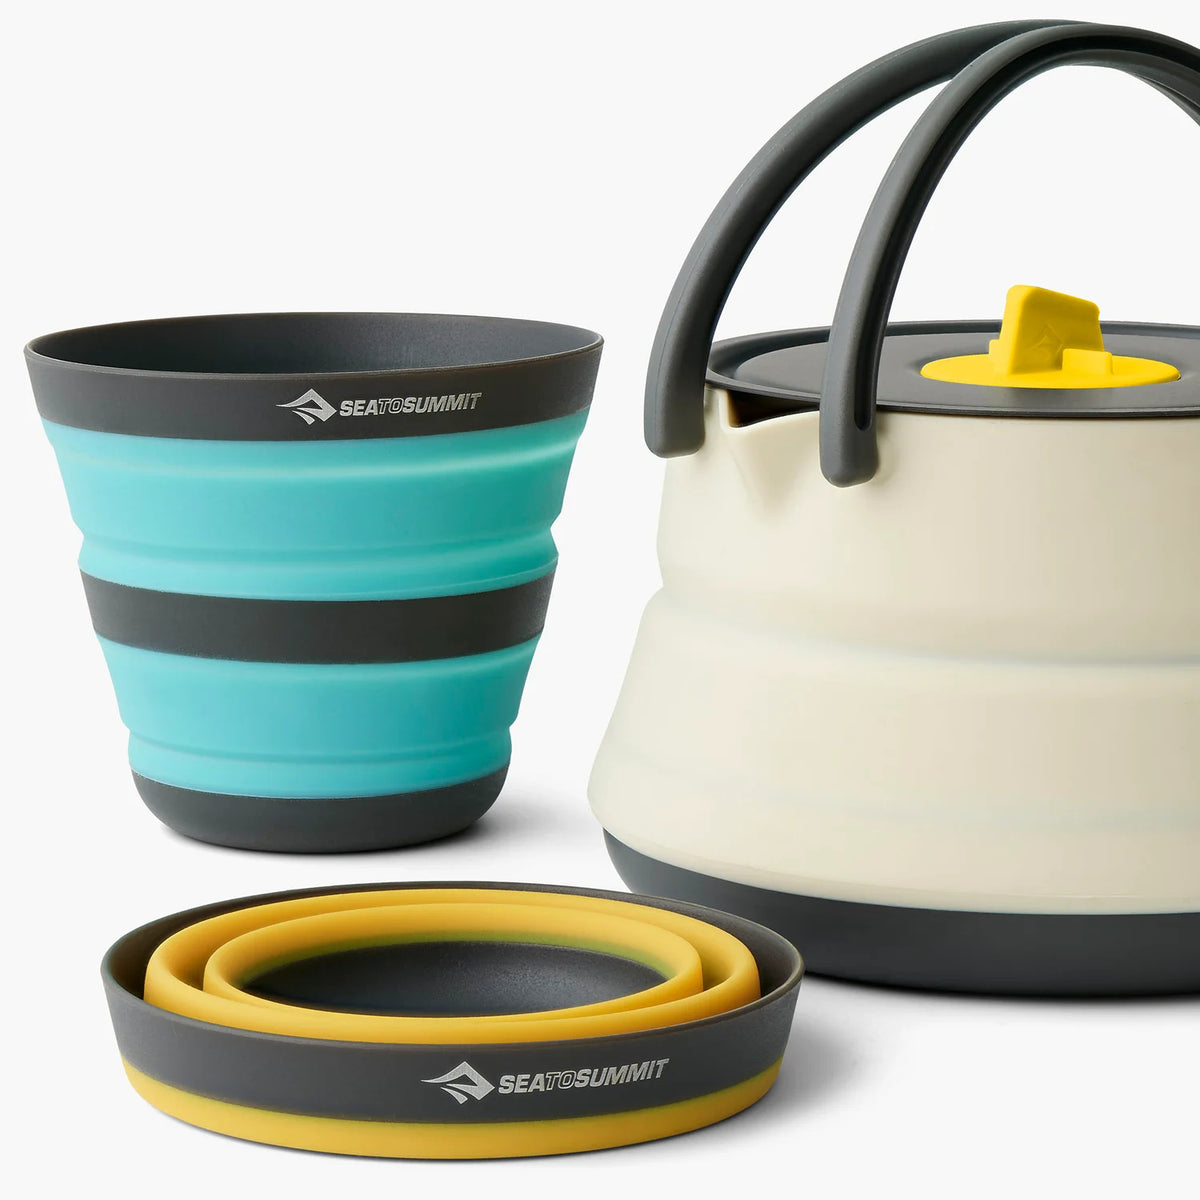 Sea to Summit Frontier Ultralight Collapsible Kettle Set (2 Person, 3 Piece)